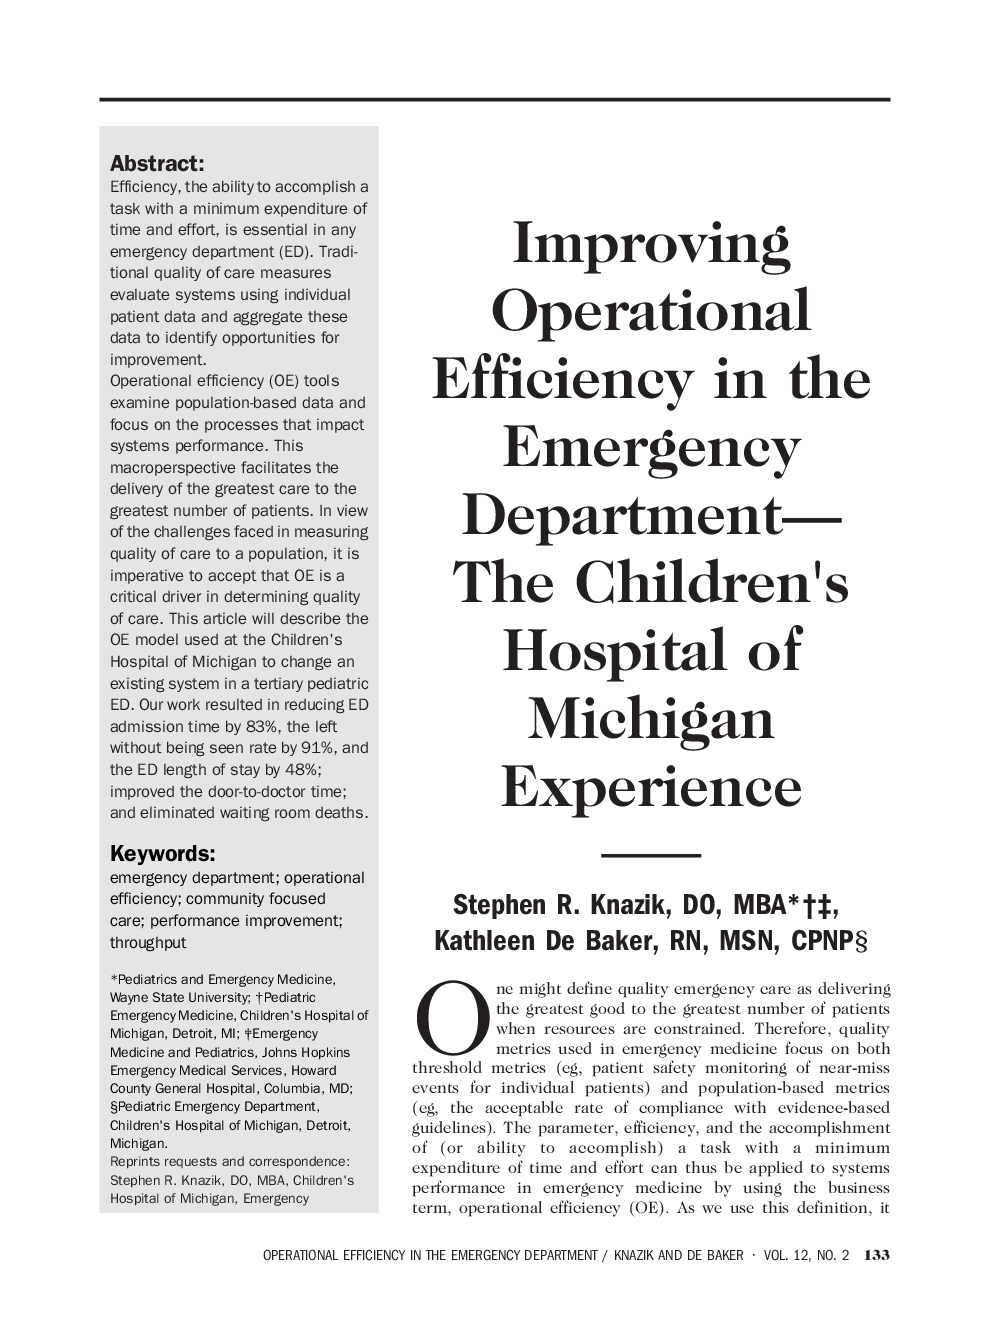 Improving Operational Efficiency in the Emergency Department—The Children's Hospital of Michigan Experience